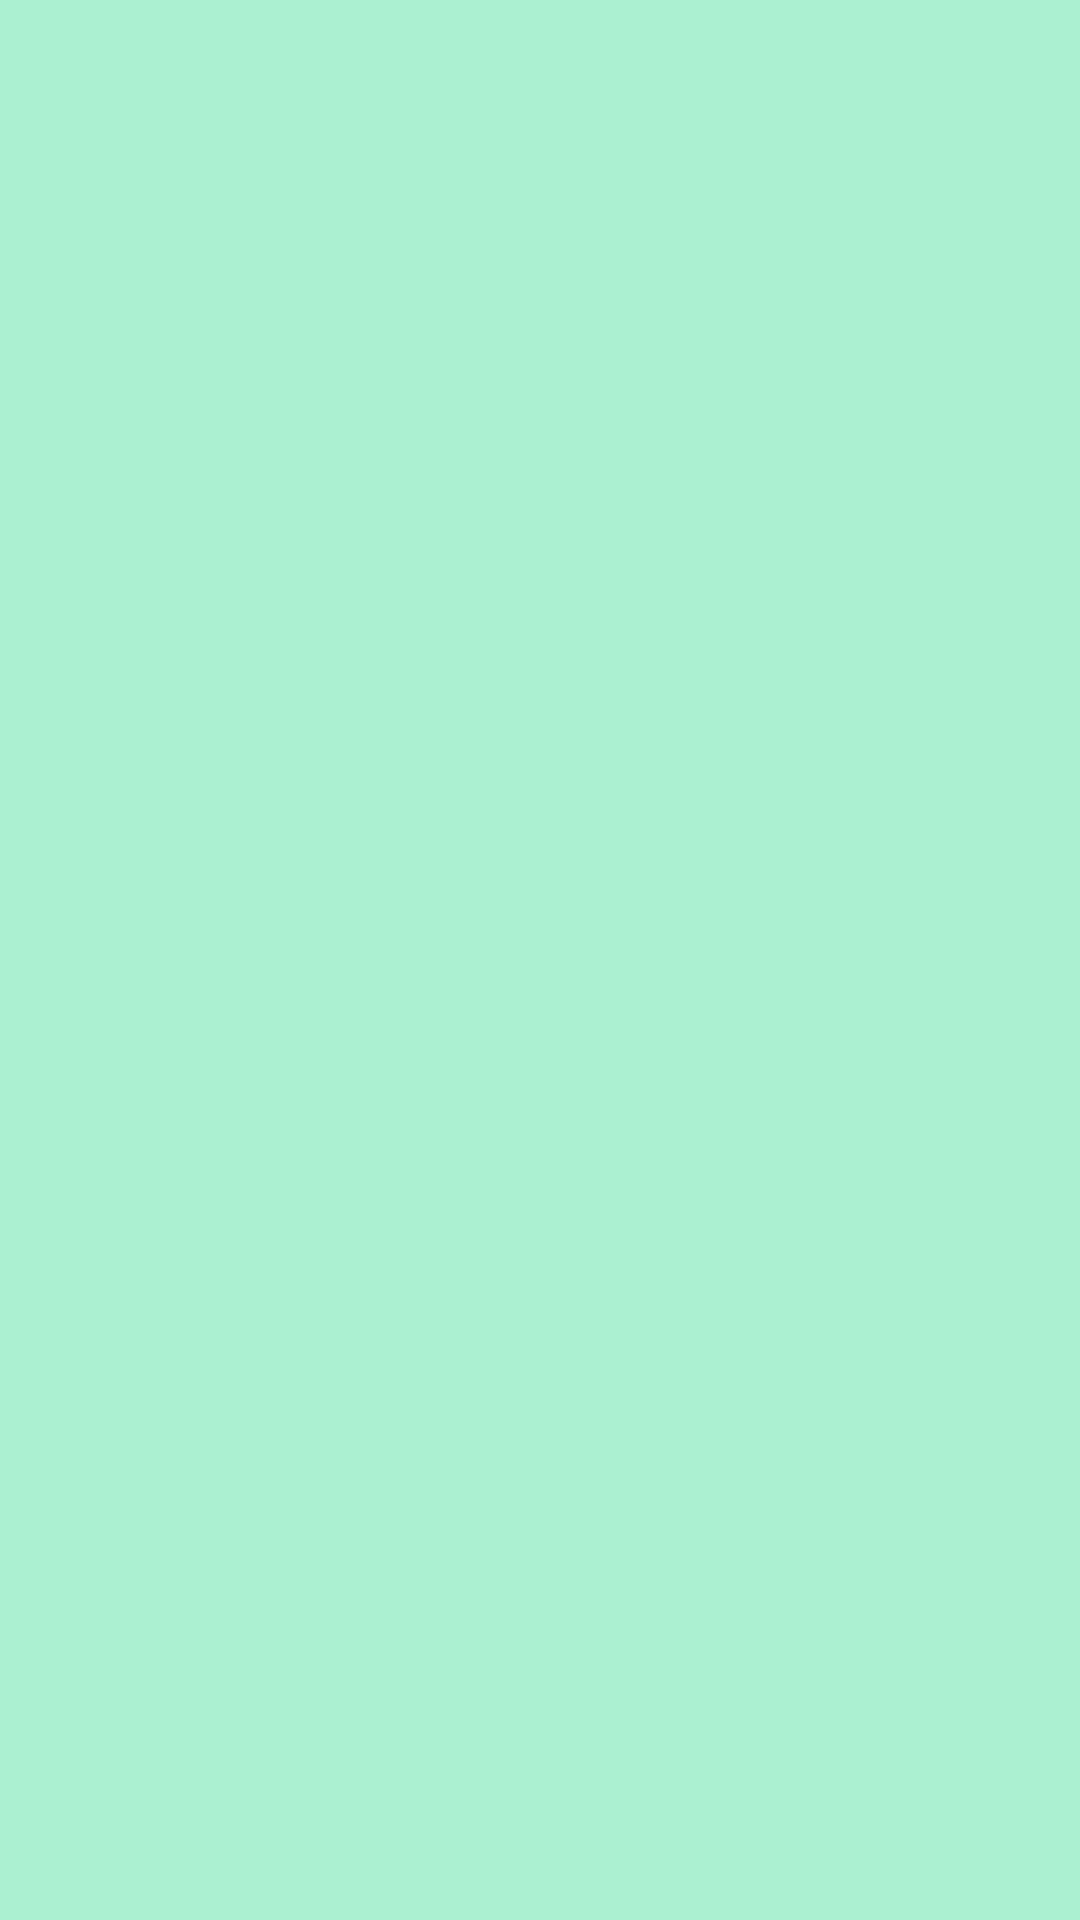 Mint Green Wallpaper iPhone HD with resolution 1080X1920 pixel. You can use this wallpaper as background for your desktop Computer Screensavers, Android or iPhone smartphones